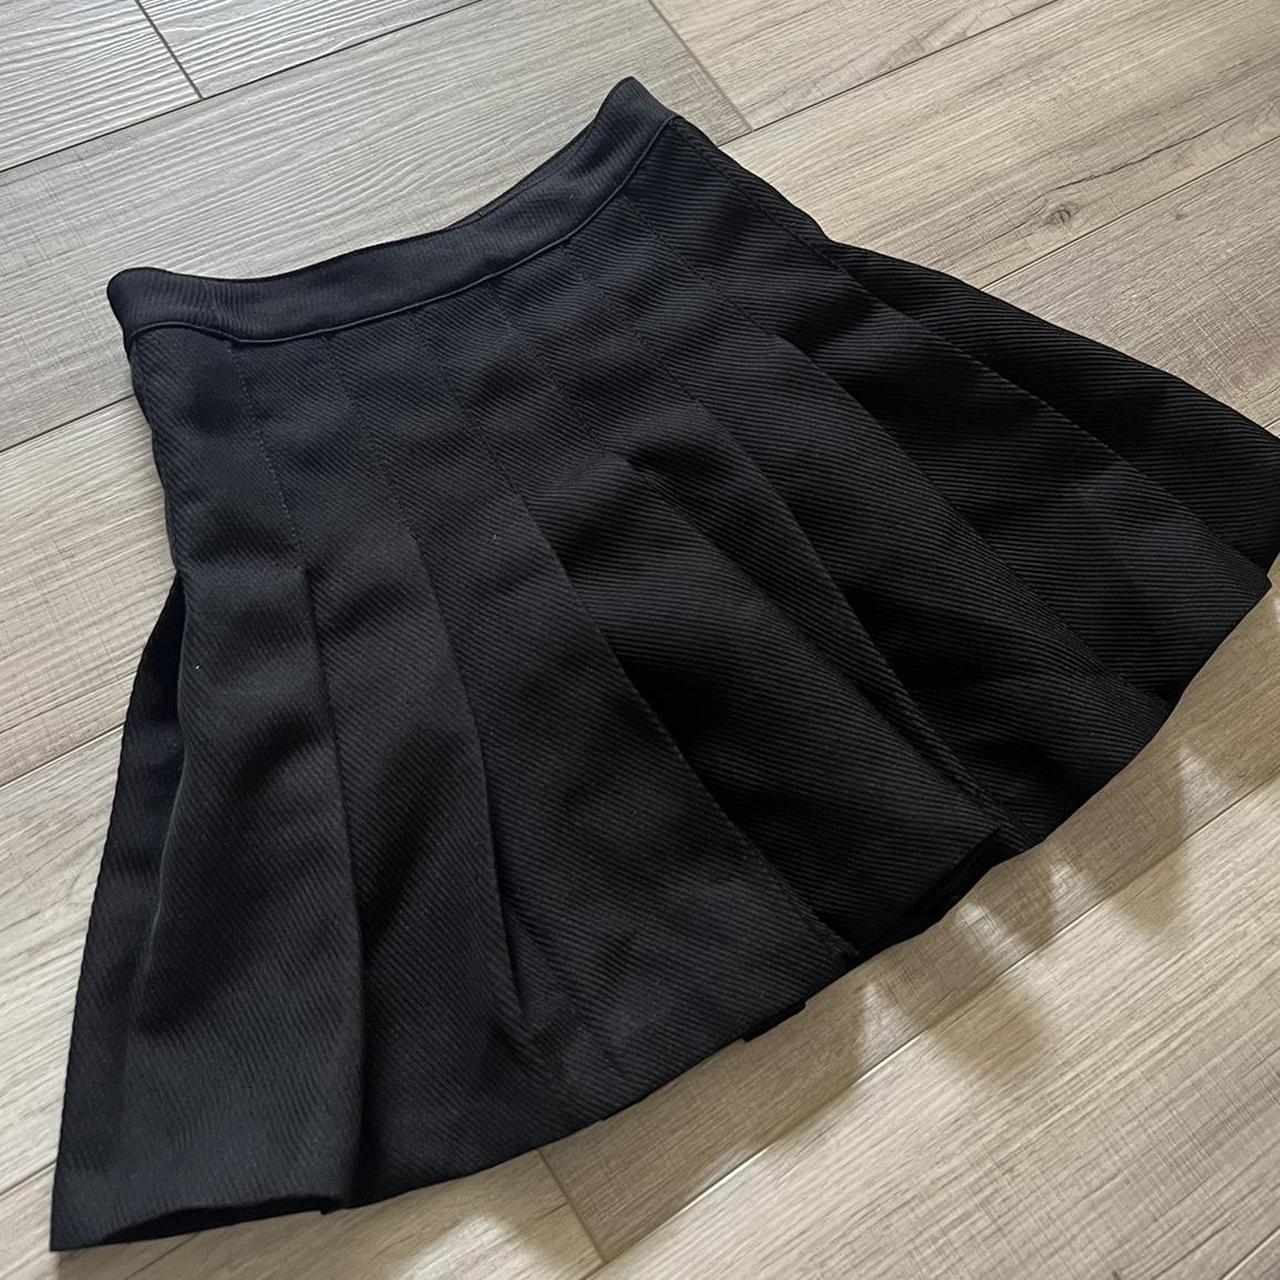 h&m black pleated skirt ⋆.ೃ࿔*:･ •only worn once,... - Depop